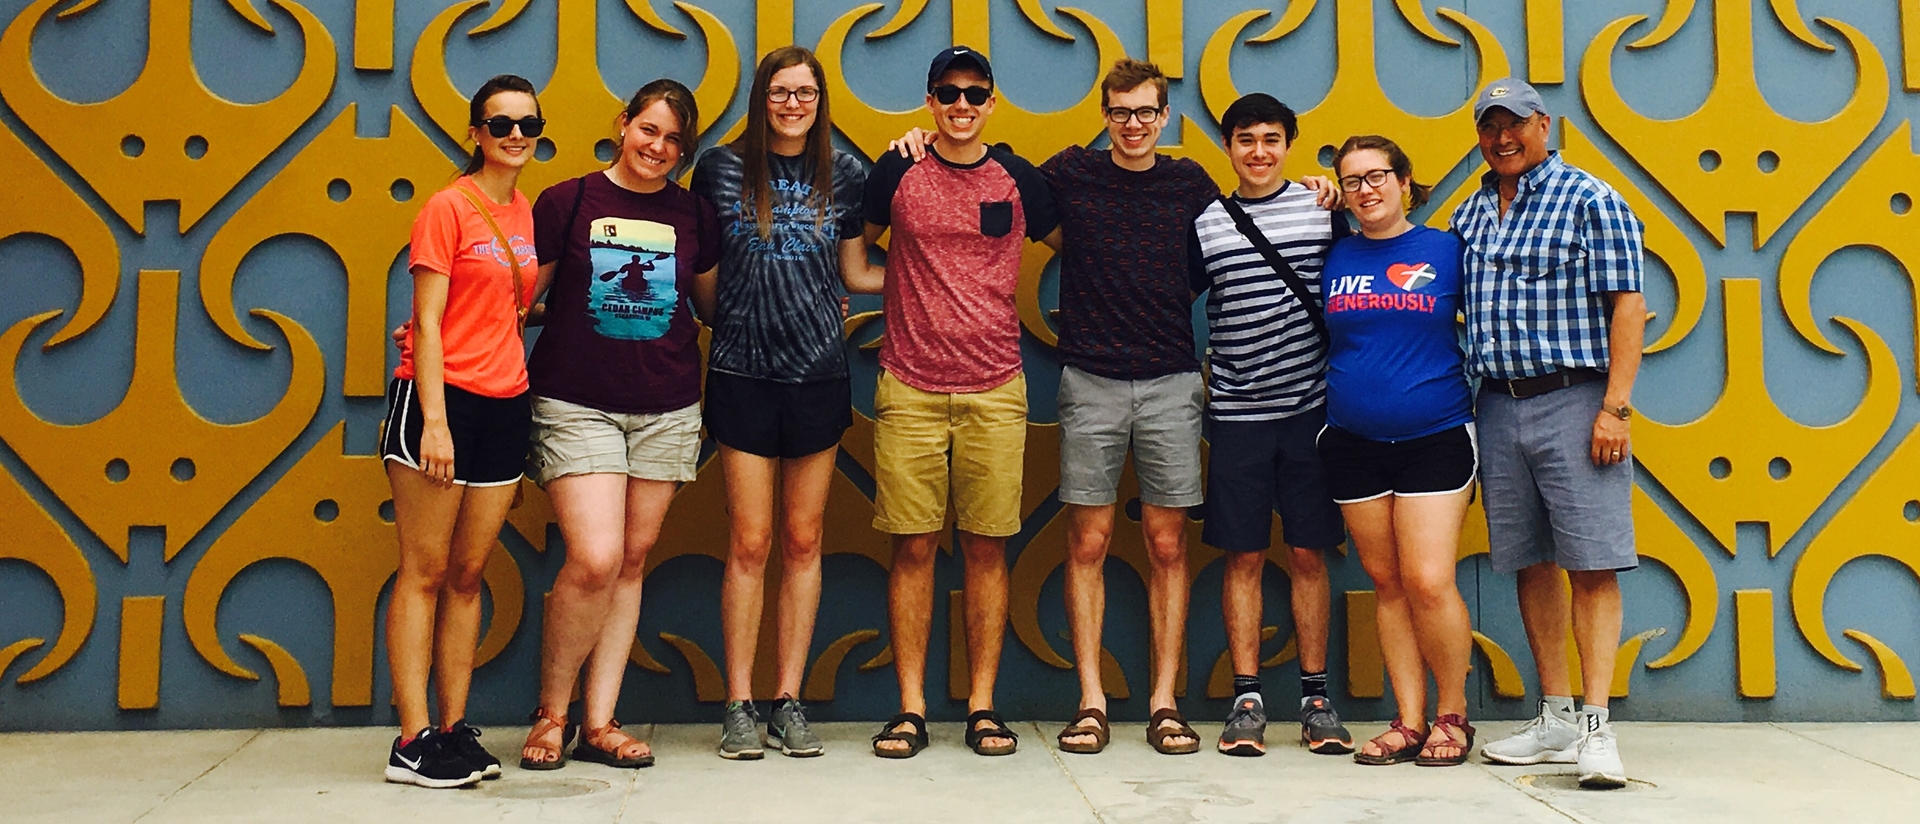 Blugolds (from left) Maggie St. Ores, Jenna Washetas, Leah Wagner, Ian Harvatine, Sam Rossmiller, Sebastian Torres (a Memorial High School student), Elizabeth Davis and Dr. Eric Torres spent time in Peru as part of a research project.